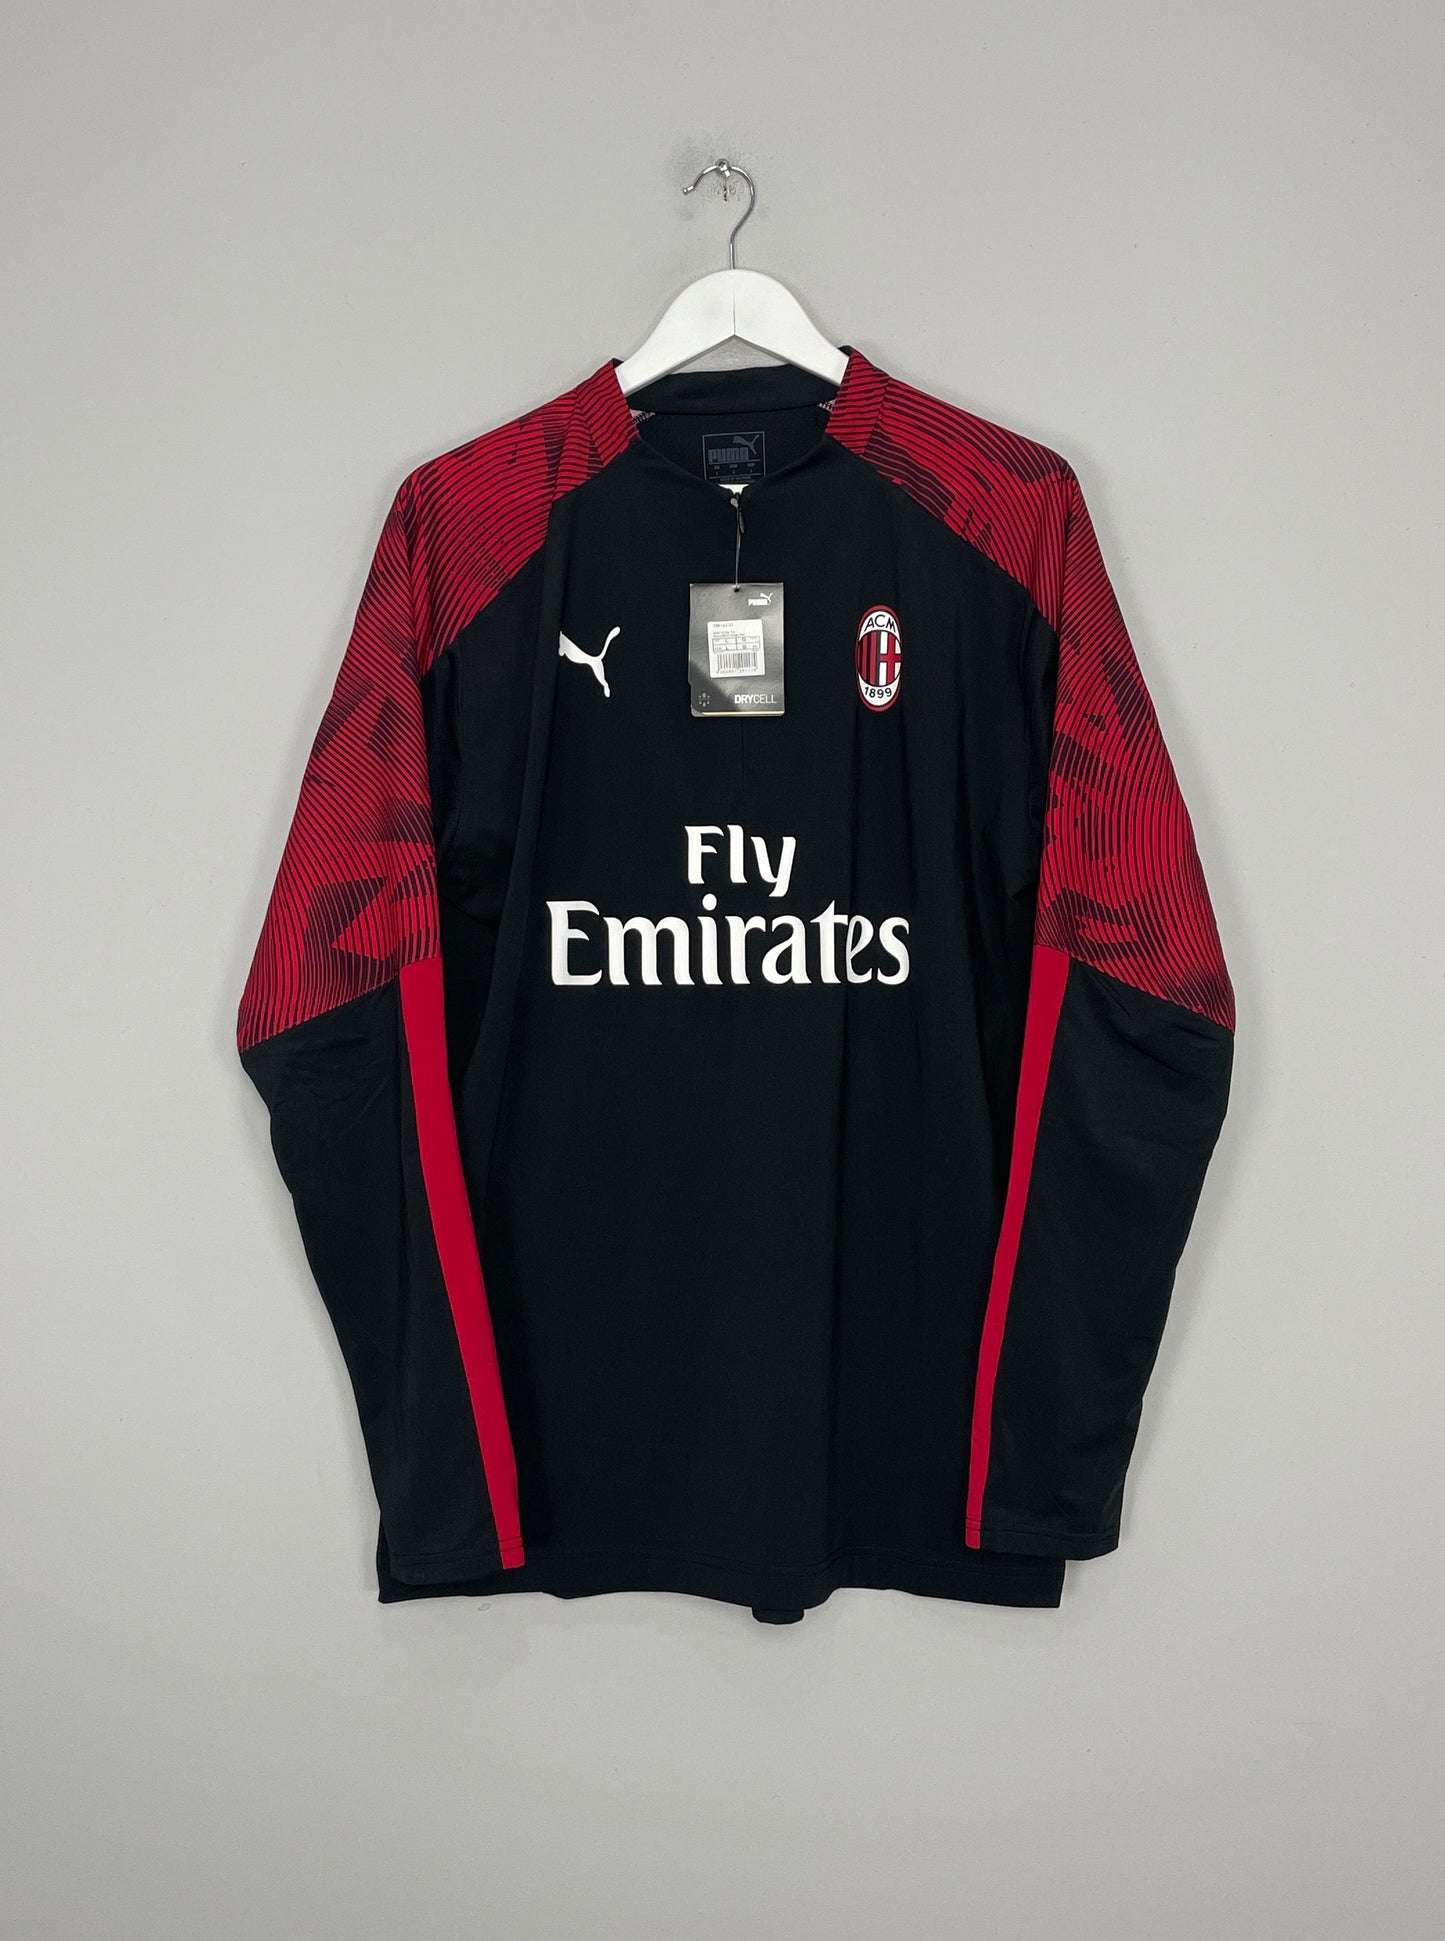 Image of the AC Milan track jacket from the 2019/20 season